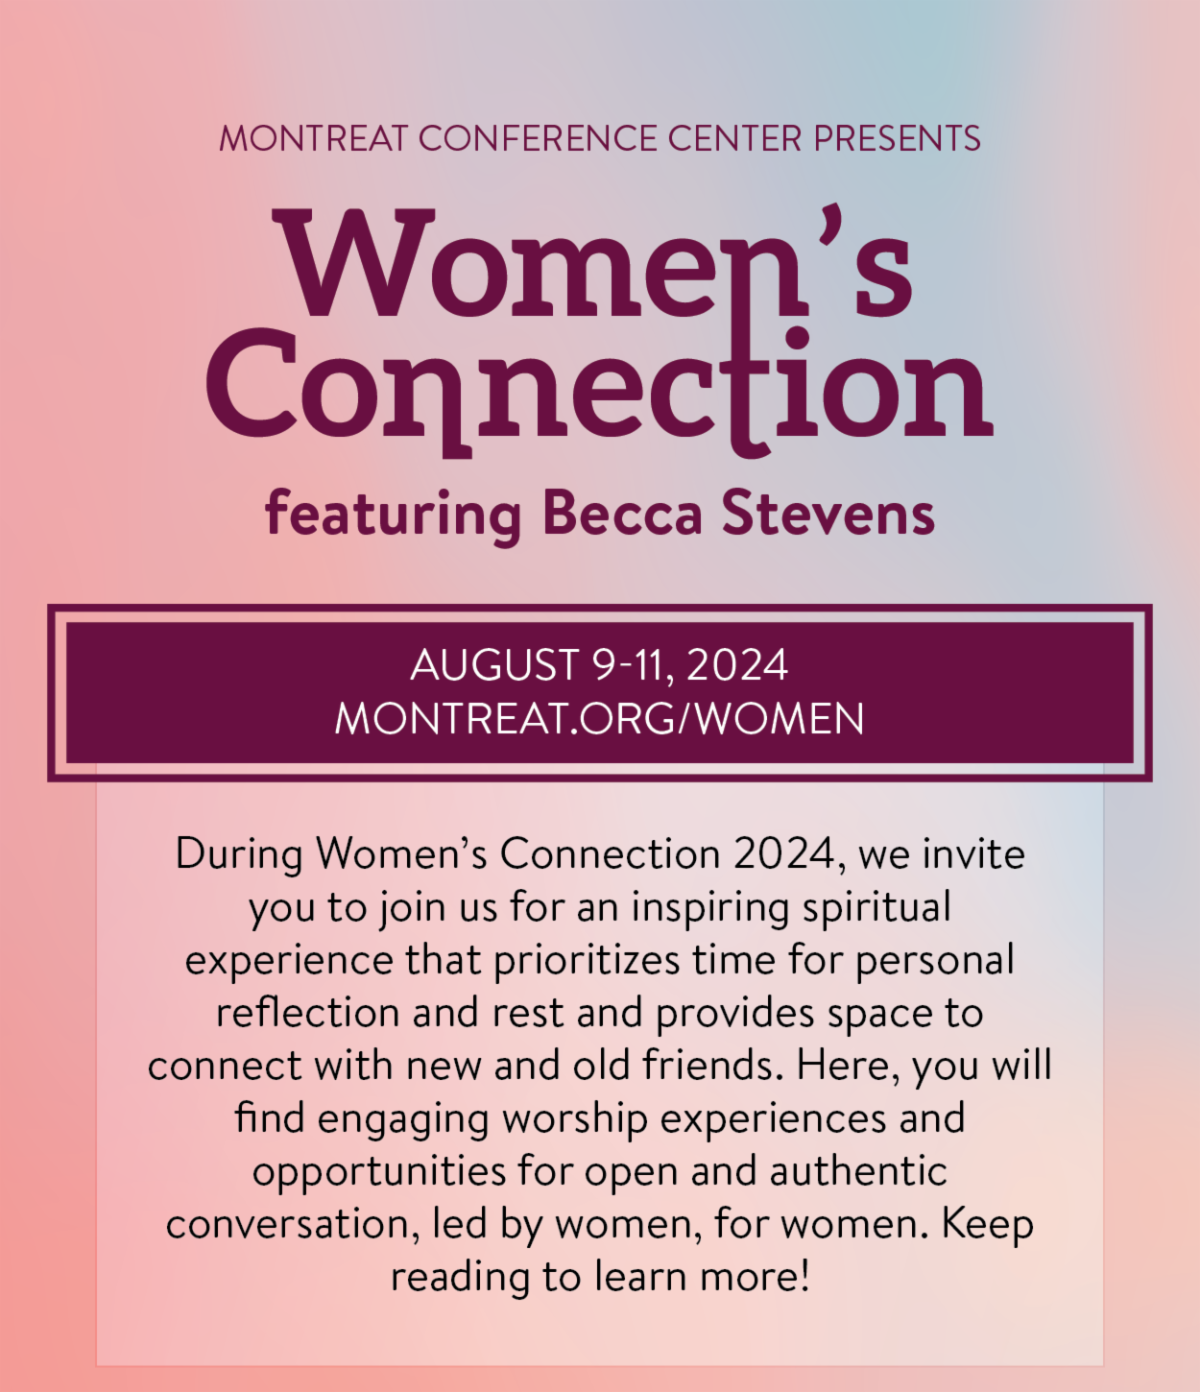 Montreat Conference Center presents Women's Connections featuring Becca Stevens: August 9-11, 2024 - During Women’s Connection 2024, we invite you to join us for an inspiring spiritual experience that prioritizes time for personal reflection and rest and provides space to connect with new and old friends. Here, you will find engaging worship experiences and opportunities for open and authentic conversation, led by women, for women. Keep reading to learn more! 